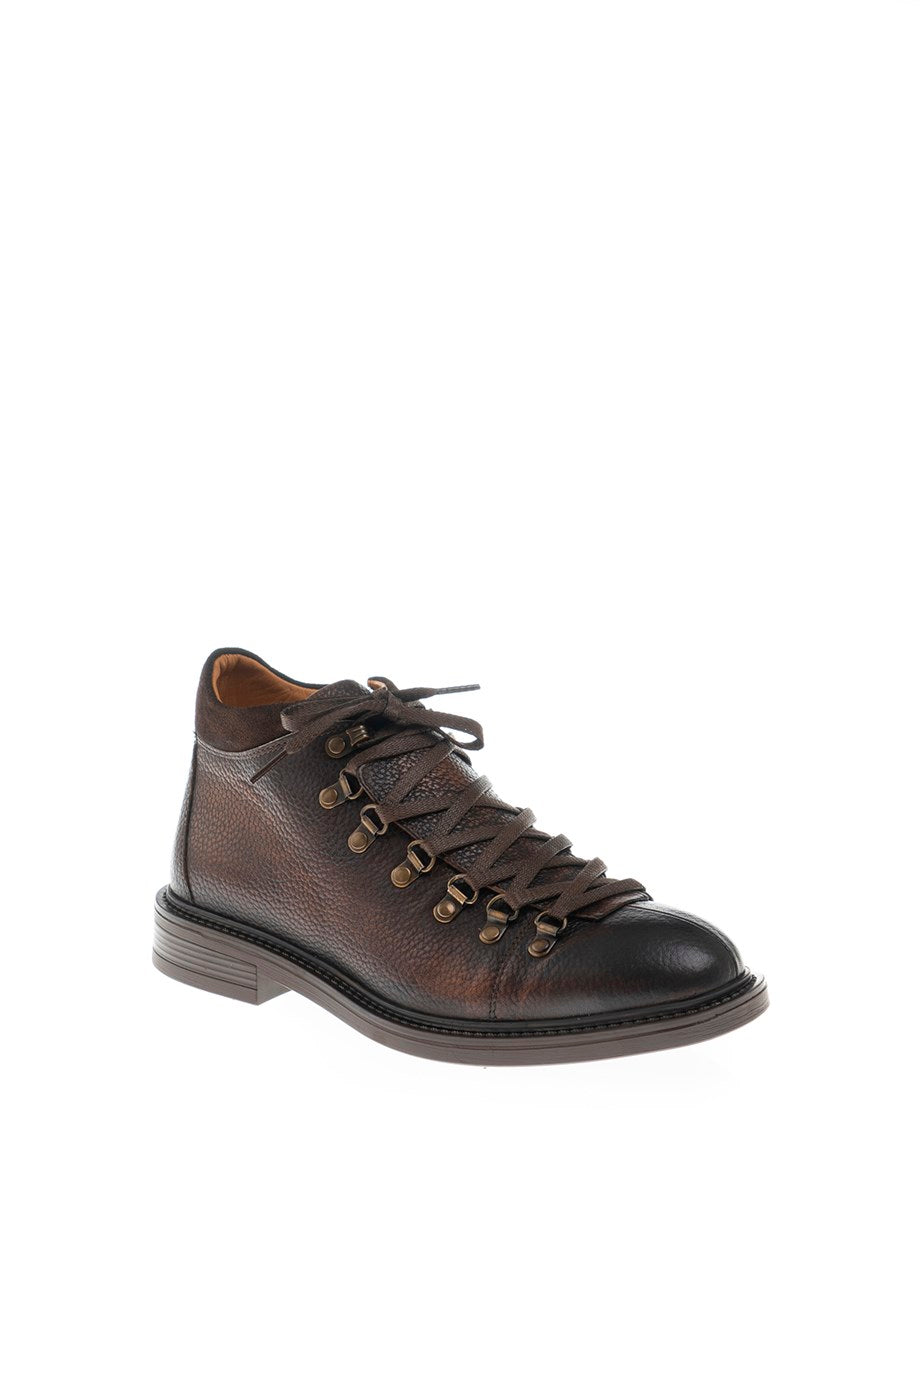 Eva Sole Genuine Leather Half Boots - MENSTYLEWITH